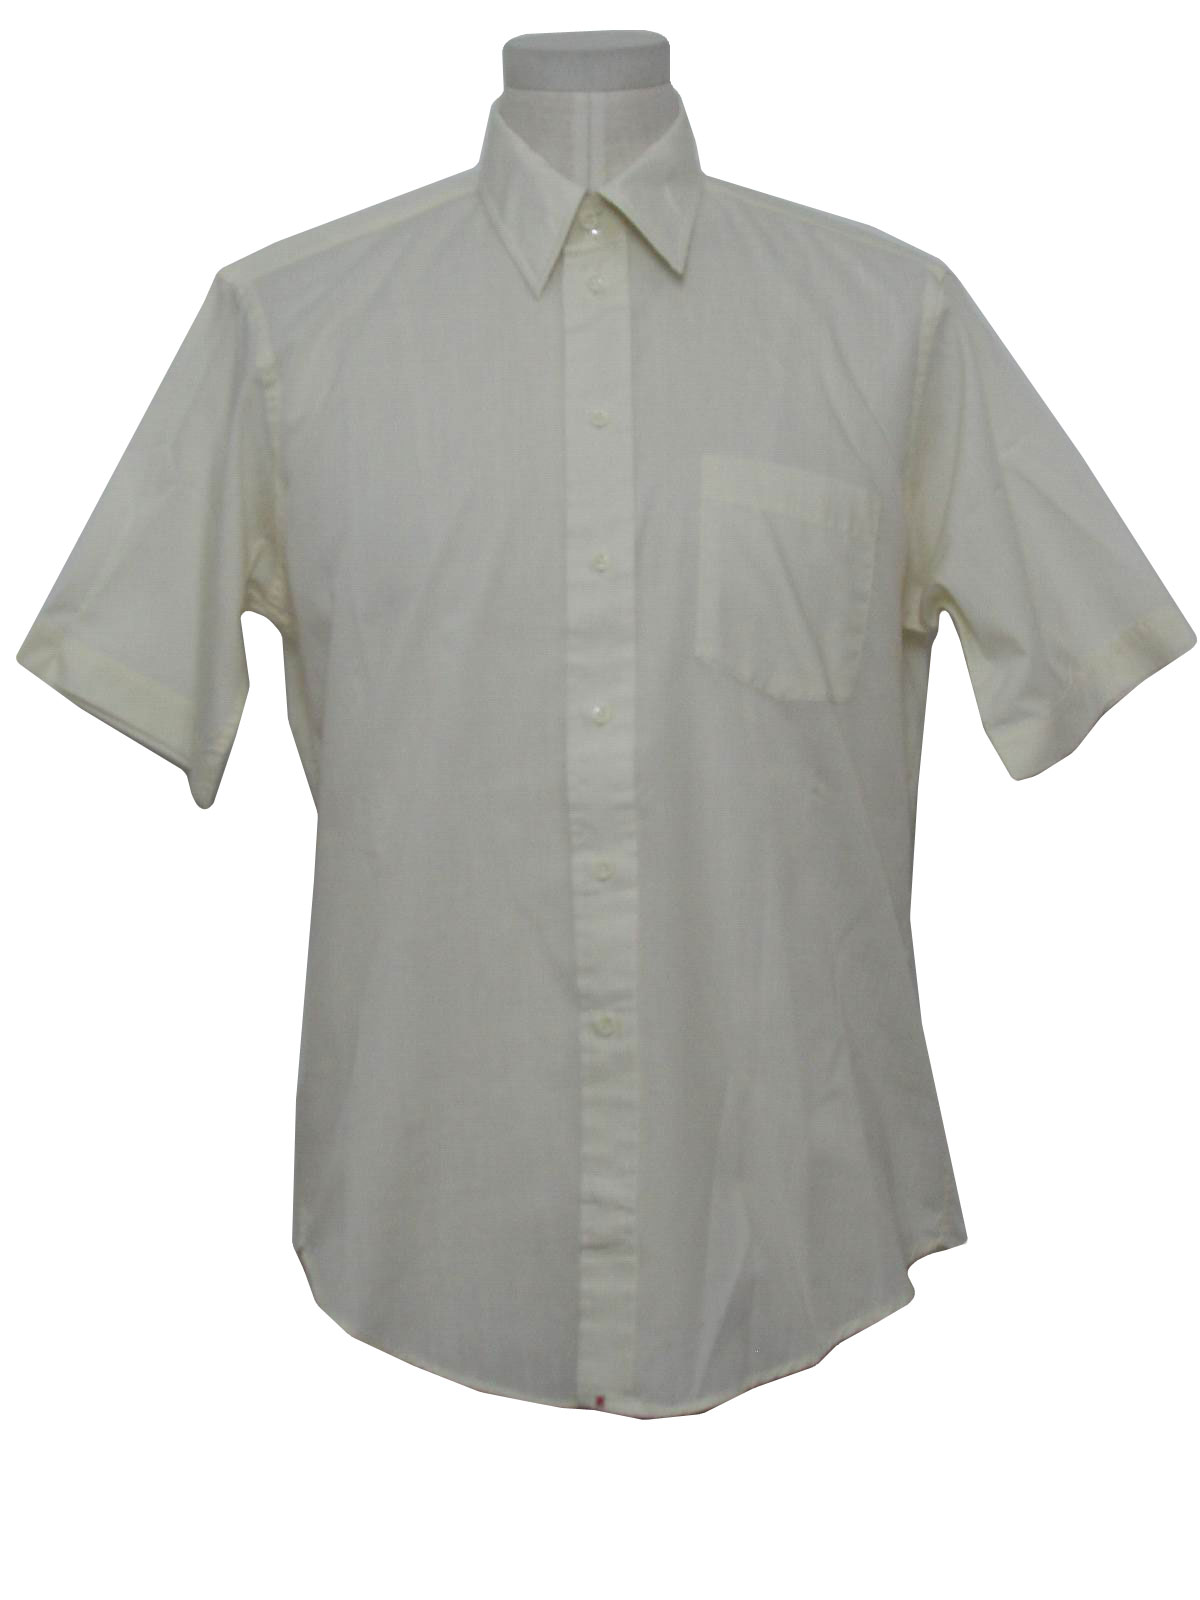 1960's Retro Shirt: Early 60s -Care Label- Mens off-white polyester ...